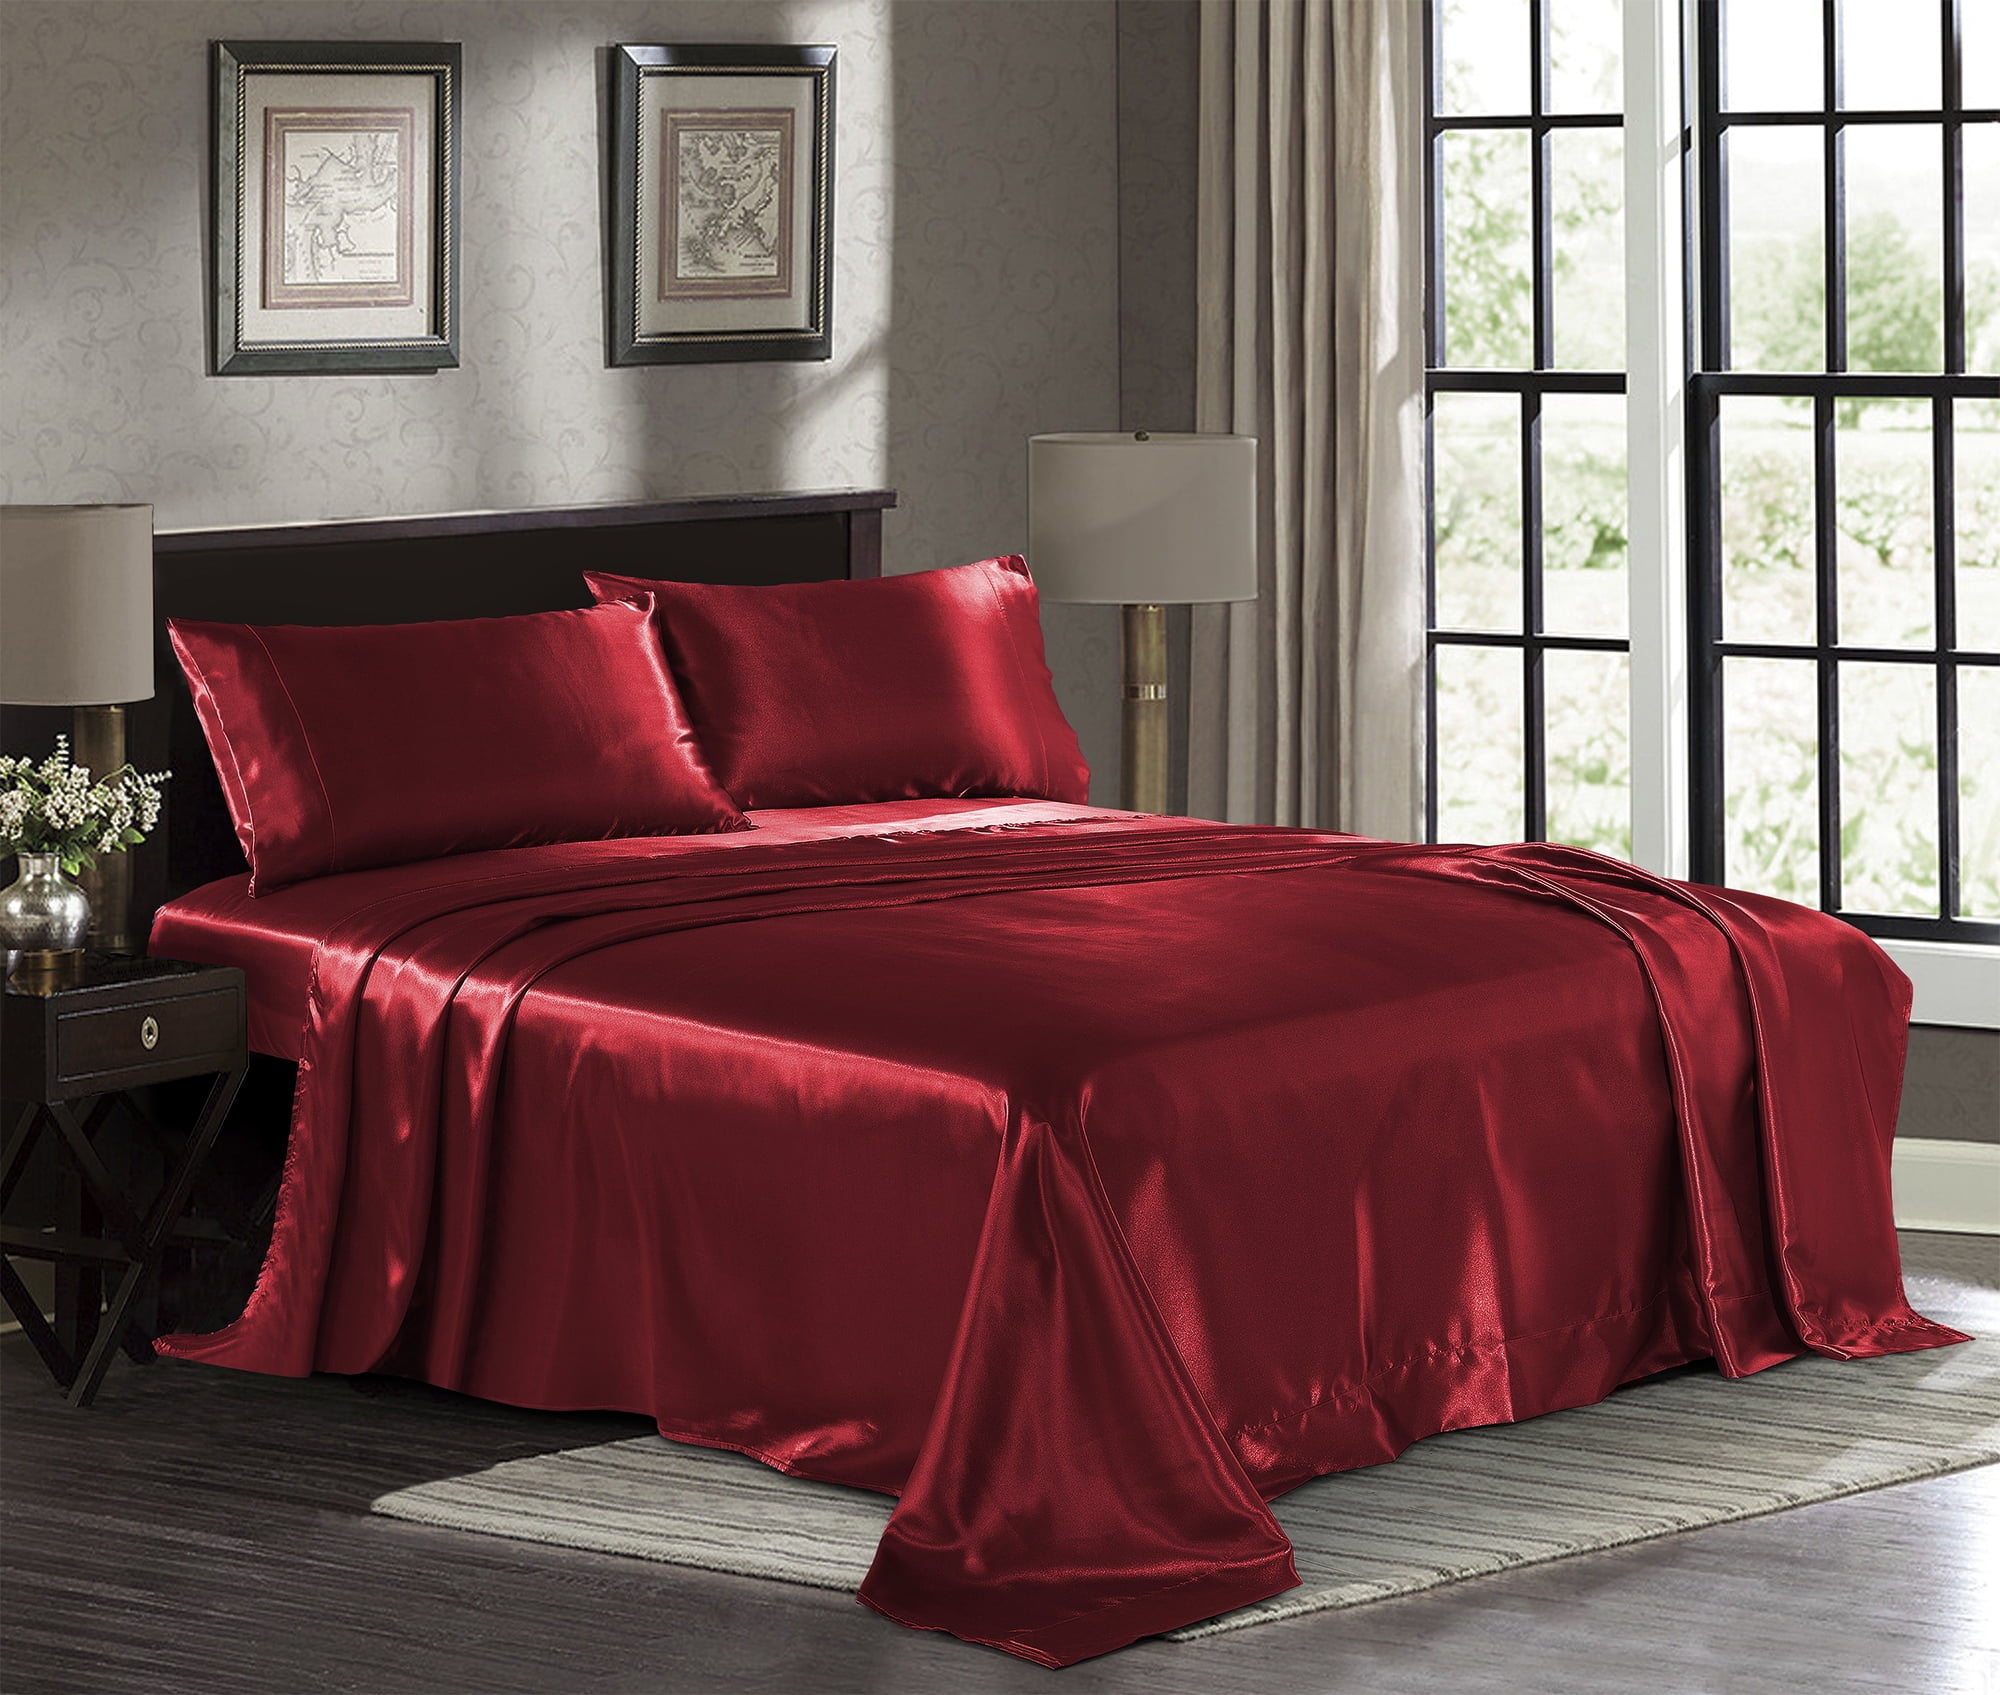 Faux Silk Satin Flat Sheets Bed Sheet Bedspread Comfort Solid Color Bed Covers 